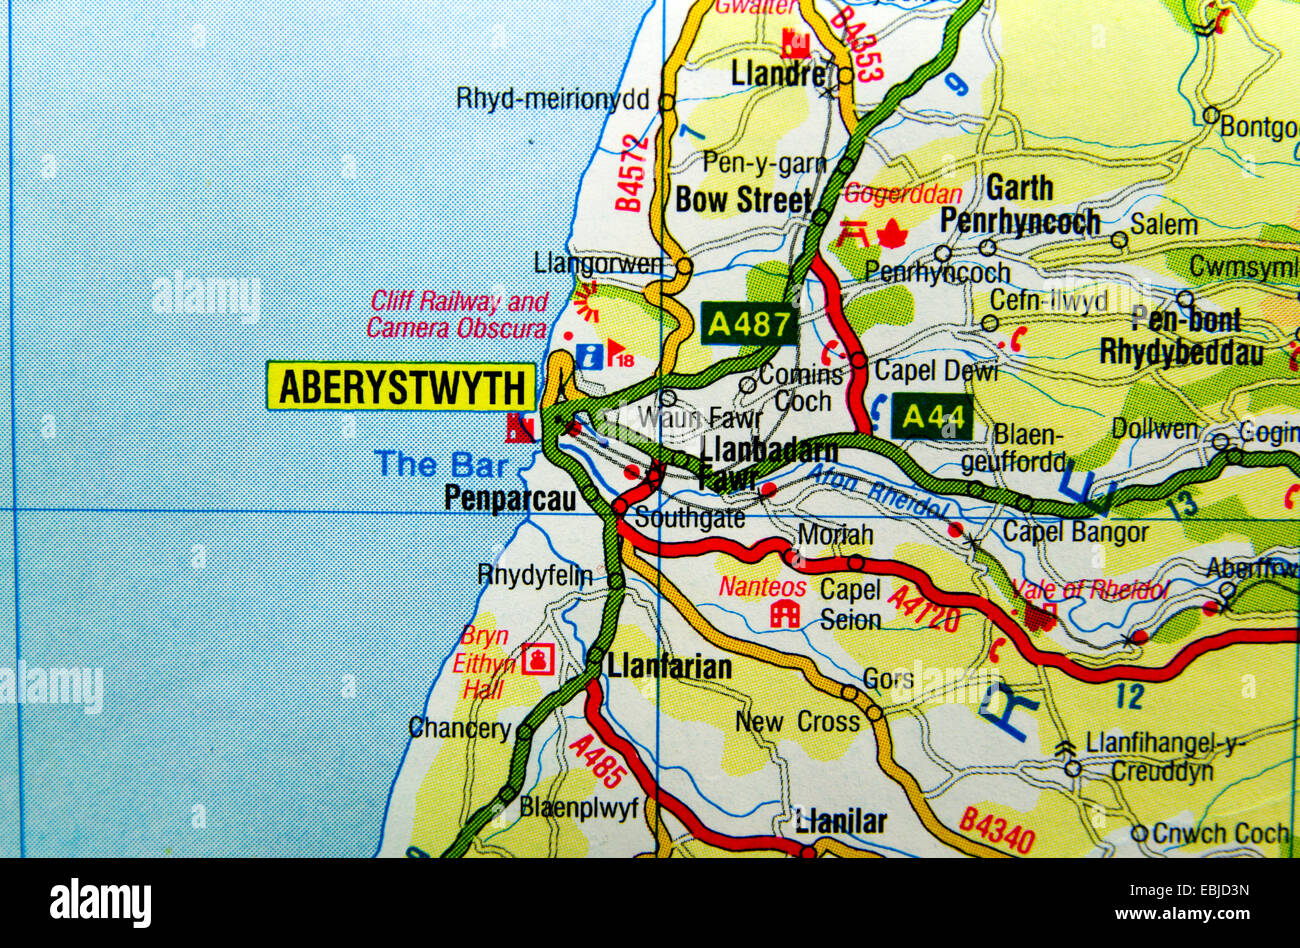 Road Map of Aberystwyth, Wales. Stock Photo